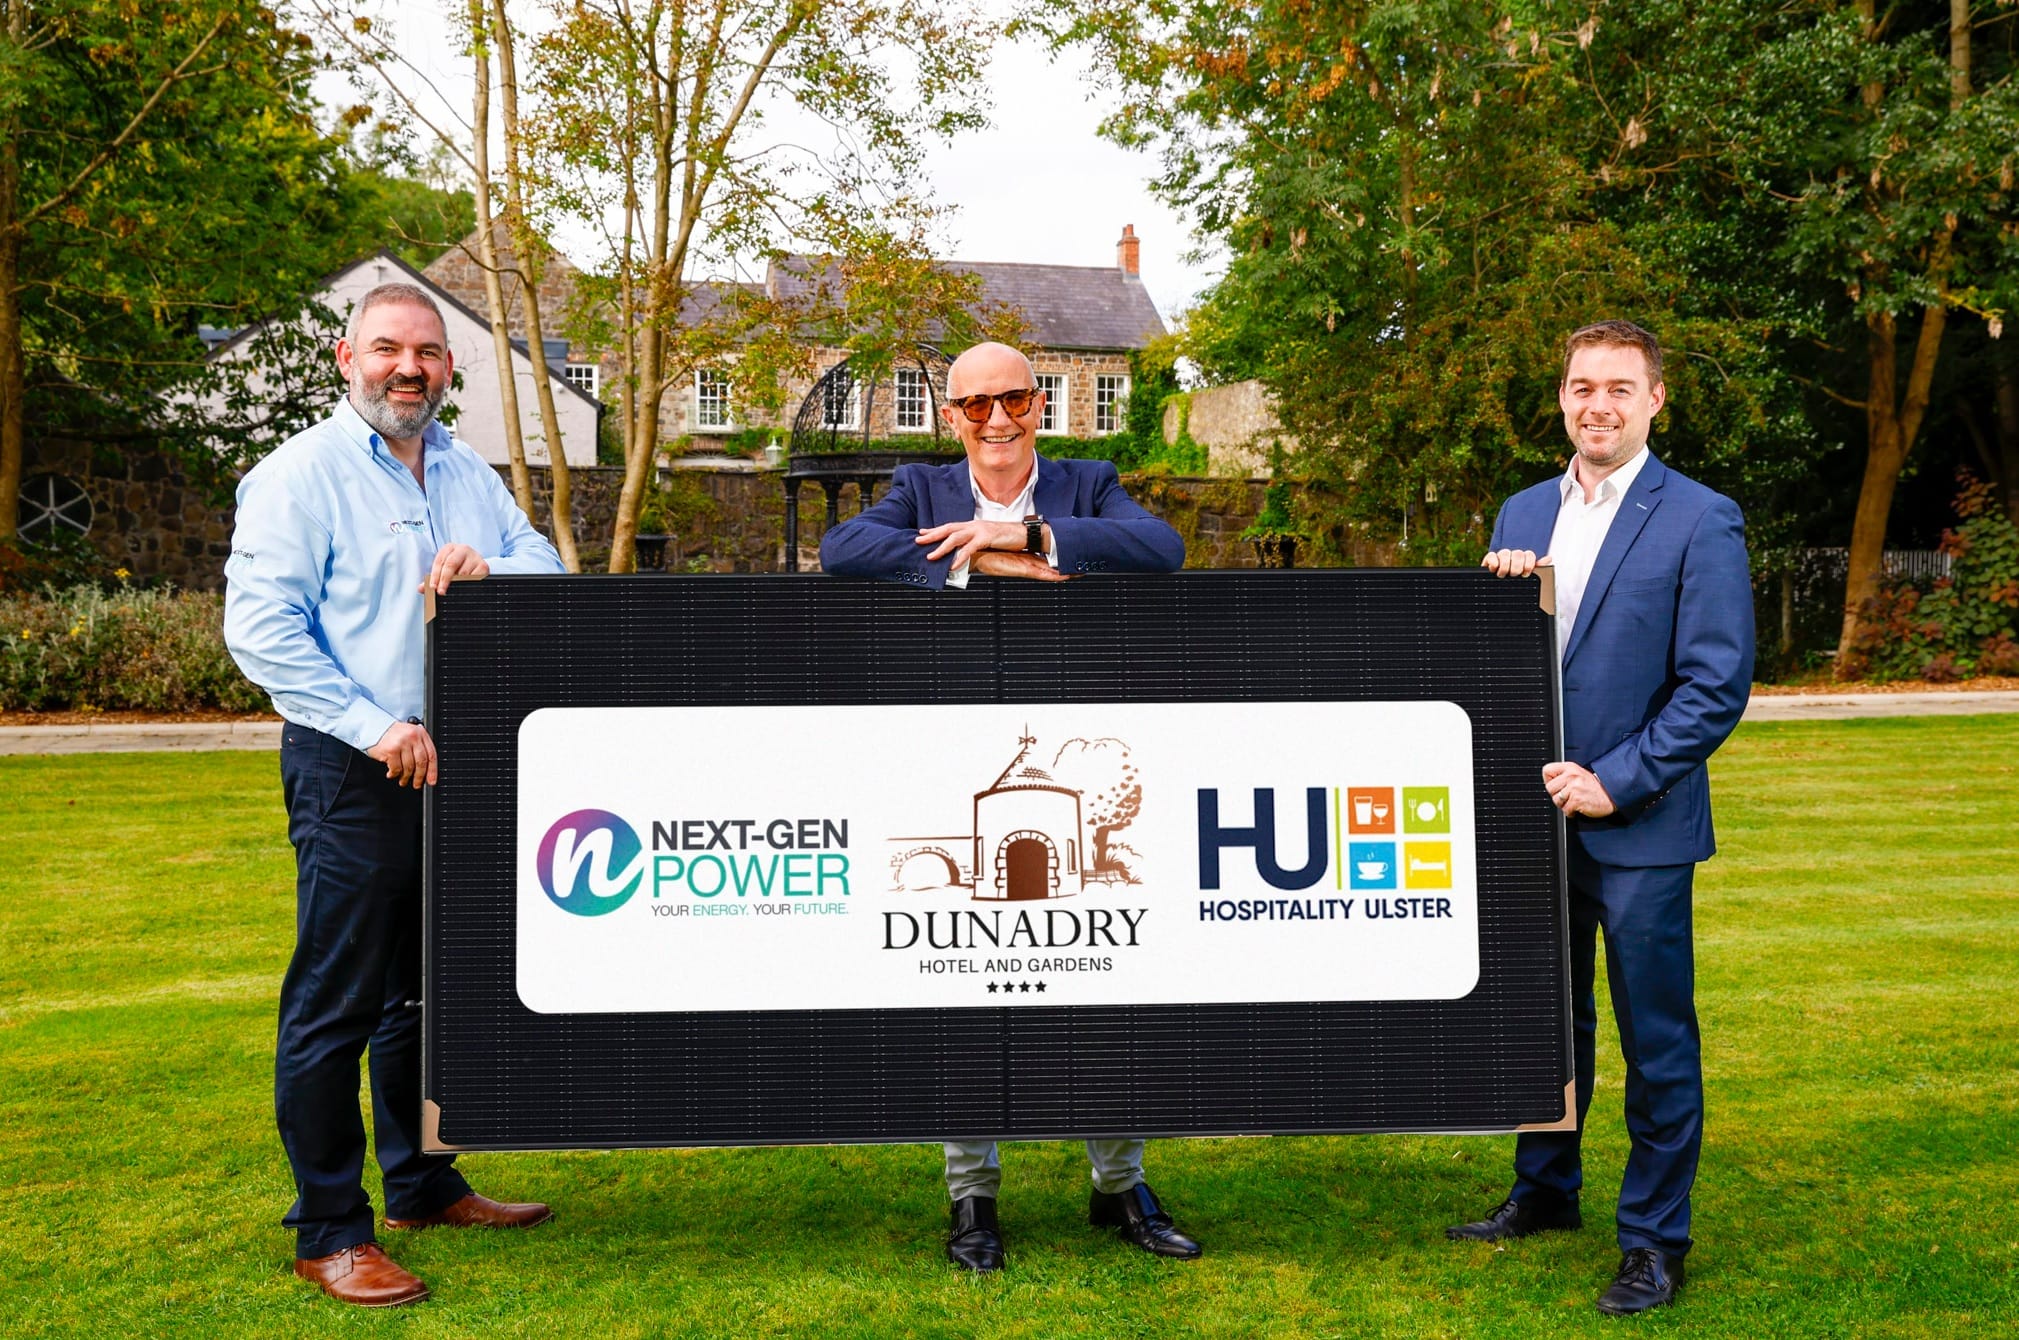 DUNADRY HOTEL EMBRACES SUSTAINABILITY WITH SOLAR POWER INSTALLATION FROM HU PARTNER NEXT GEN